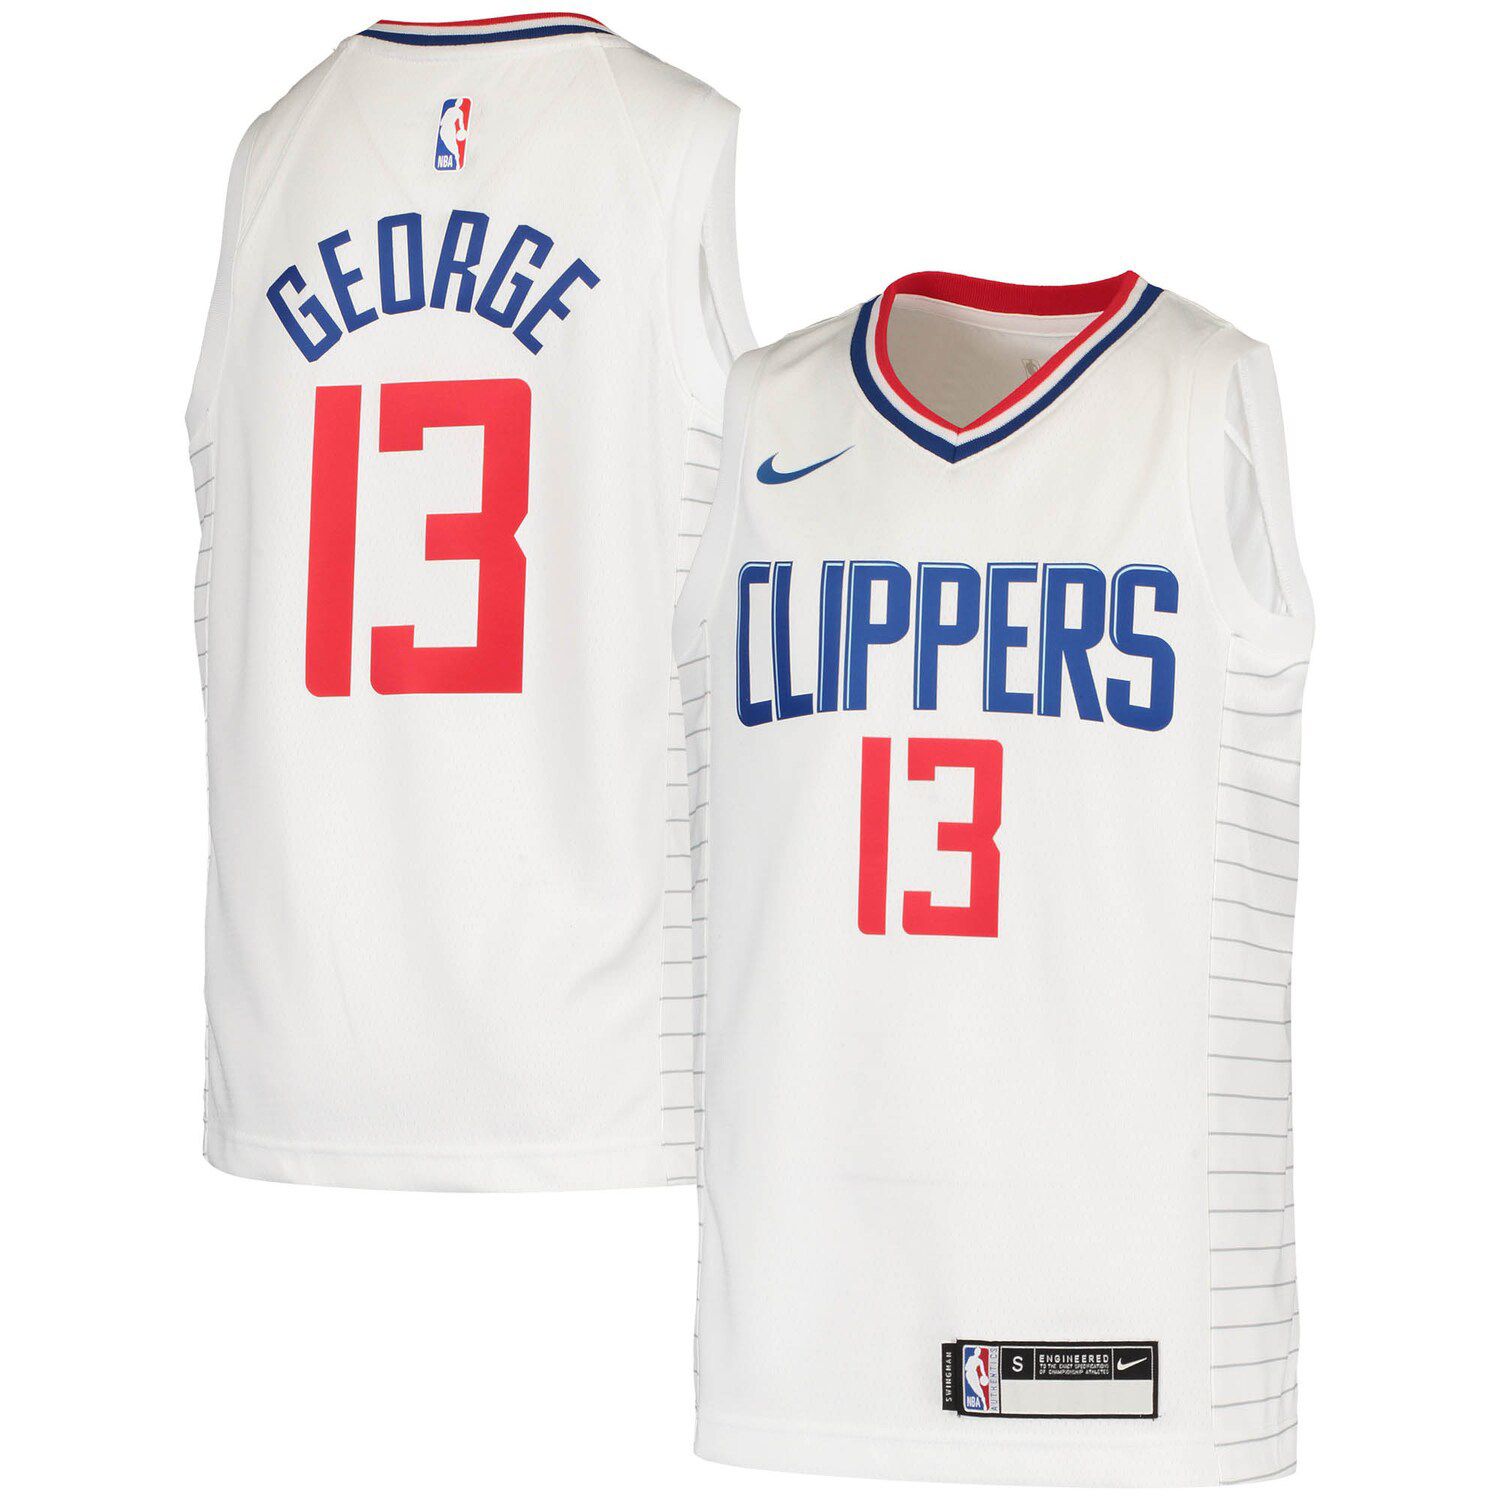 paul george youth jersey